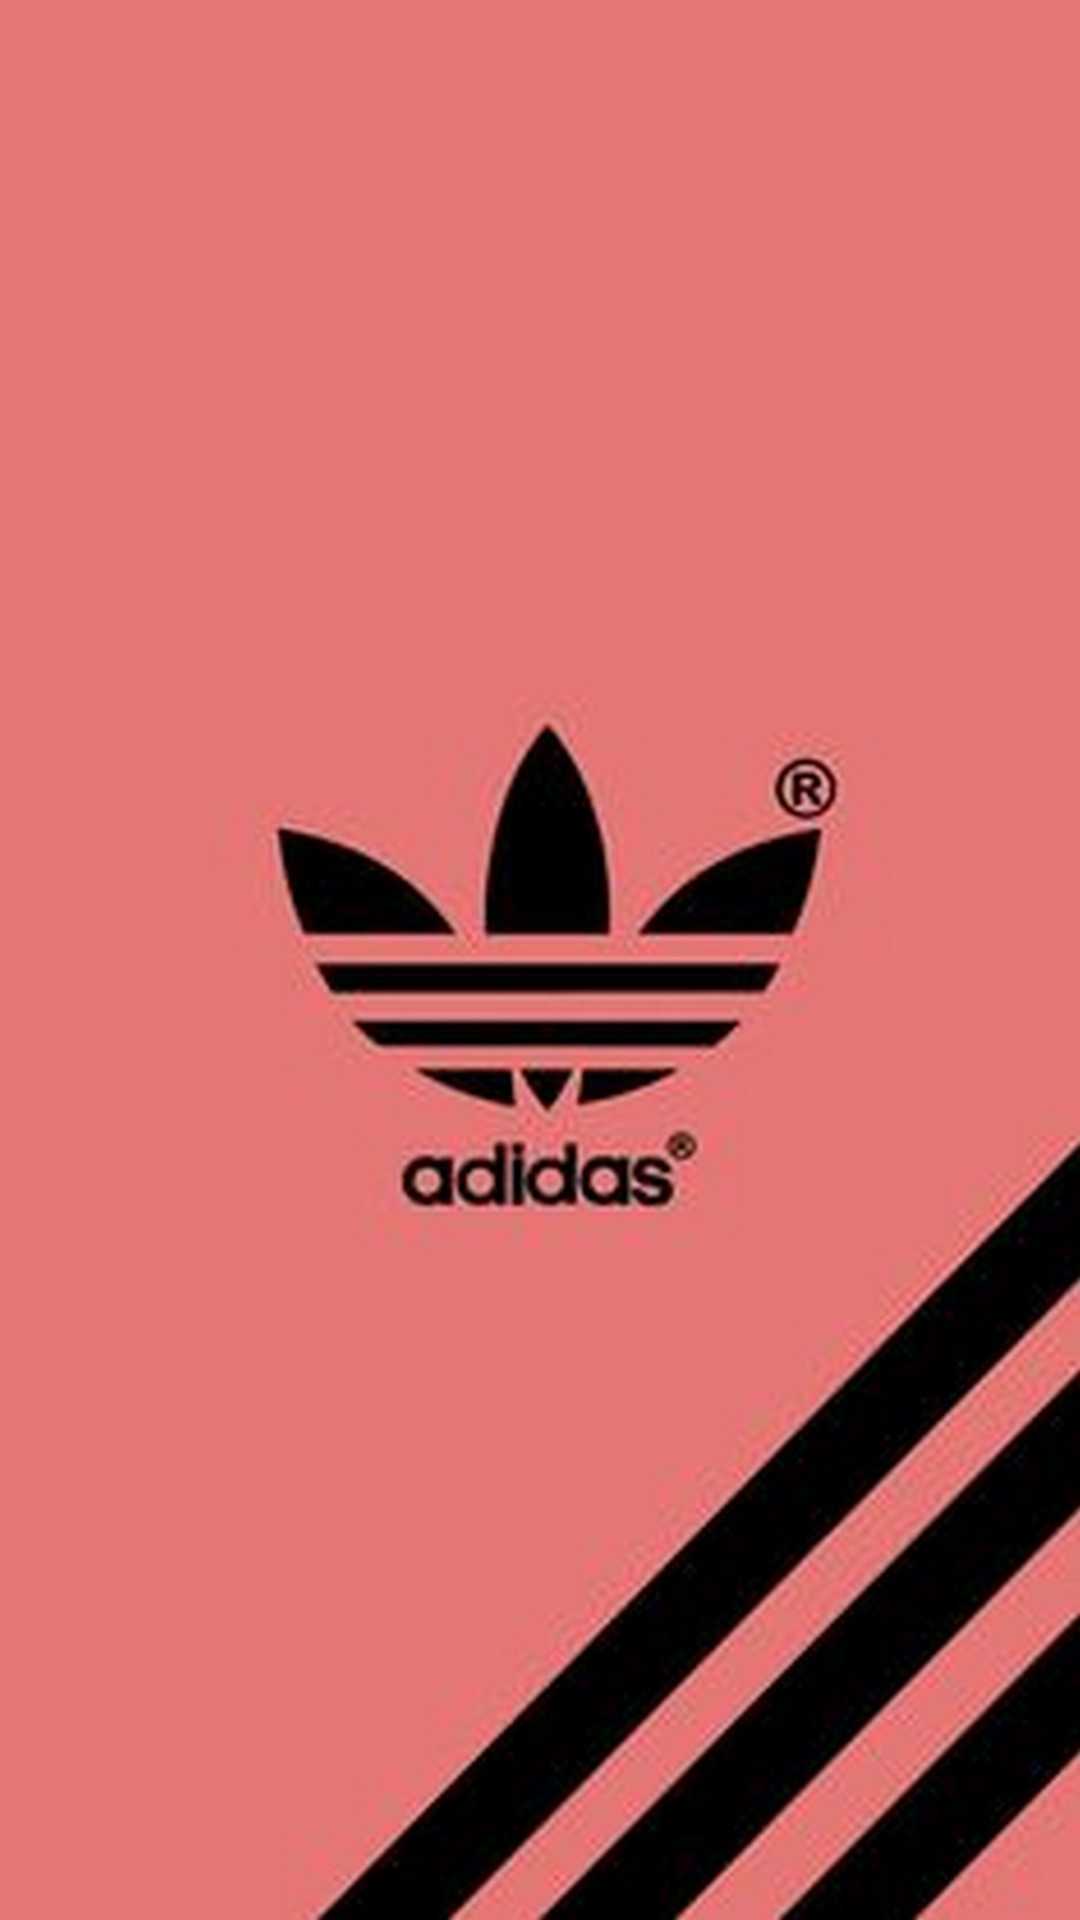 Adidas Wallpaper for iPhone 11, Pro Max, X, 8, 7, 6 - Free Download on  3Wallpapers